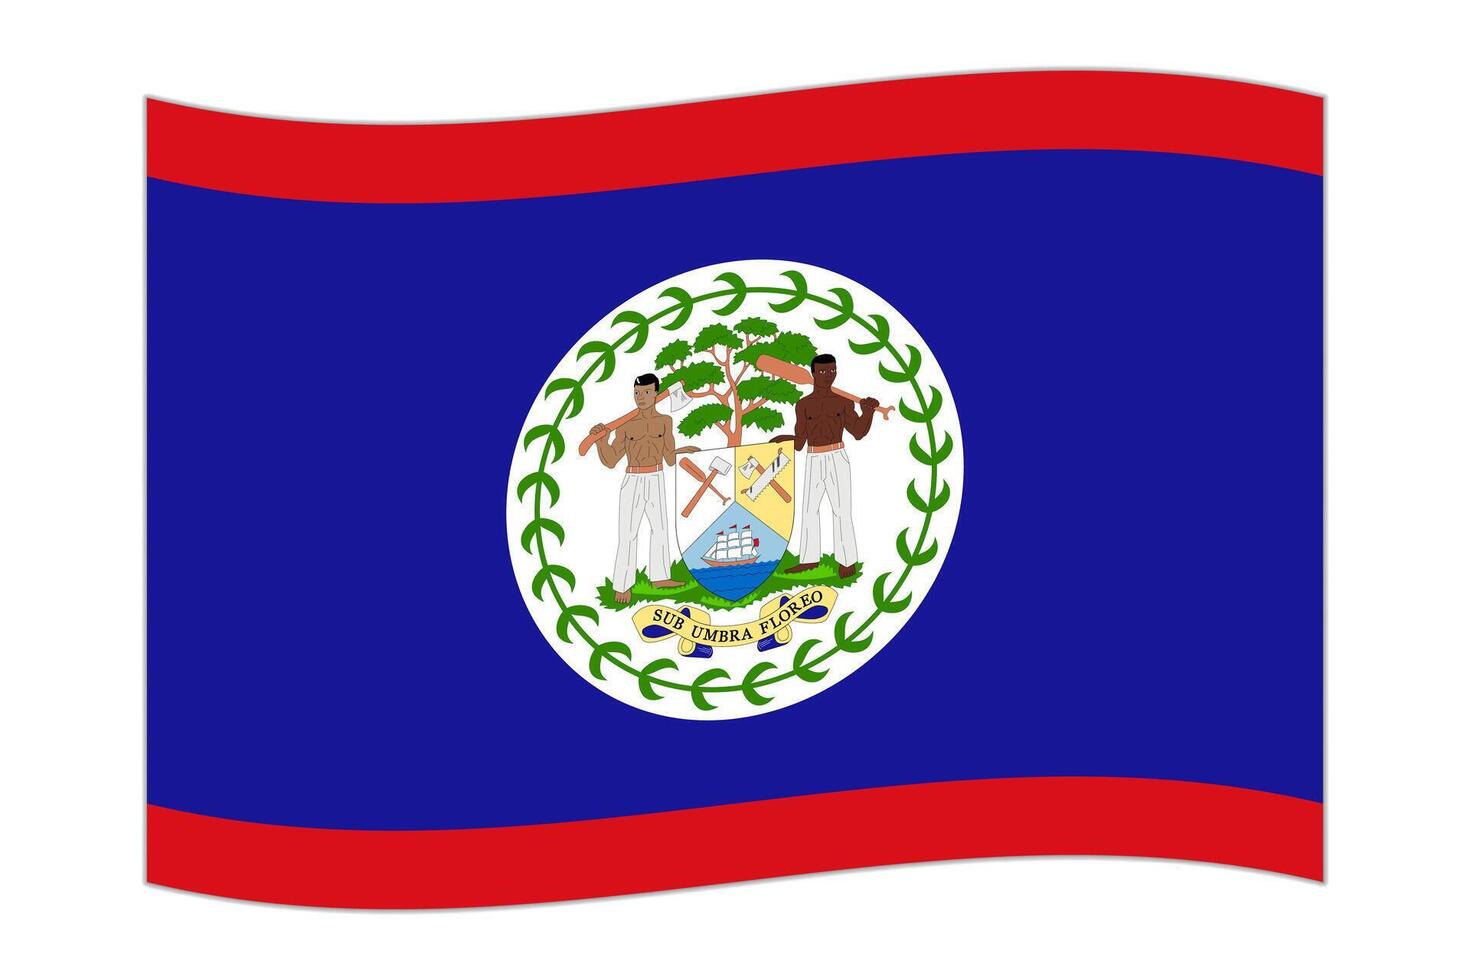 Waving flag of the country Belize. Vector illustration.